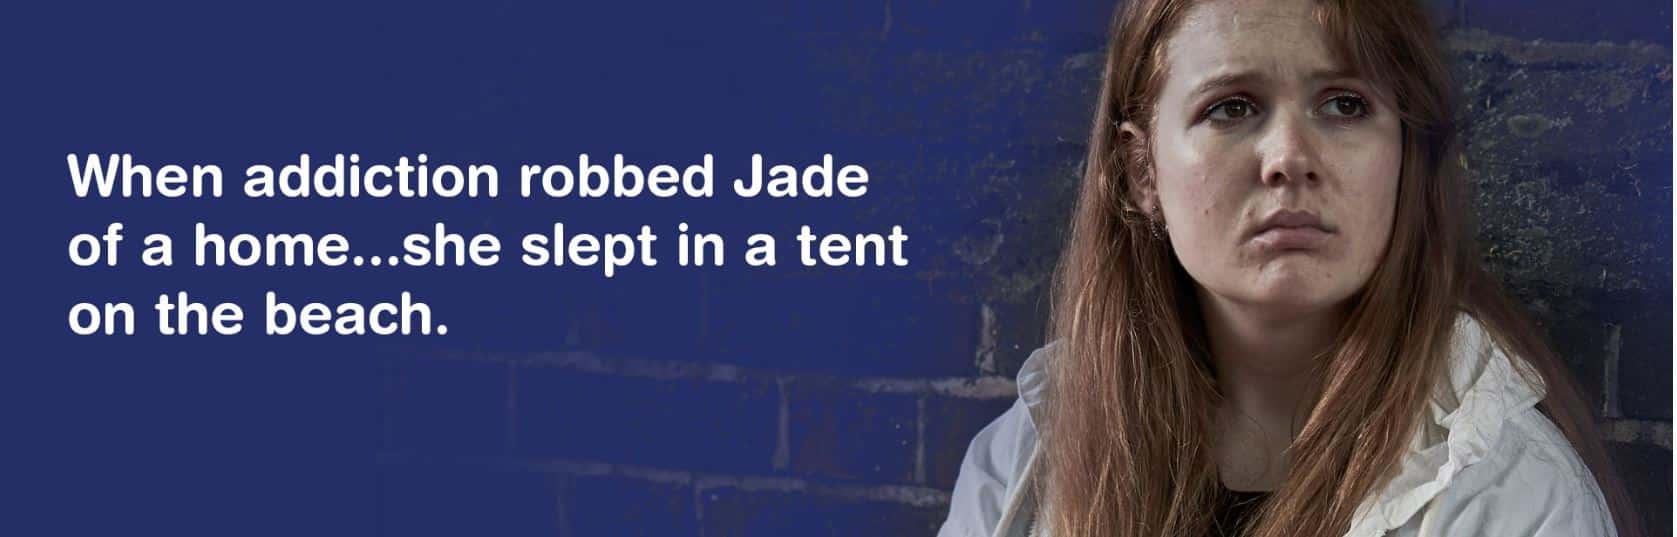 When addiction robbed Jade of a home... she slept in a tent on the beach.